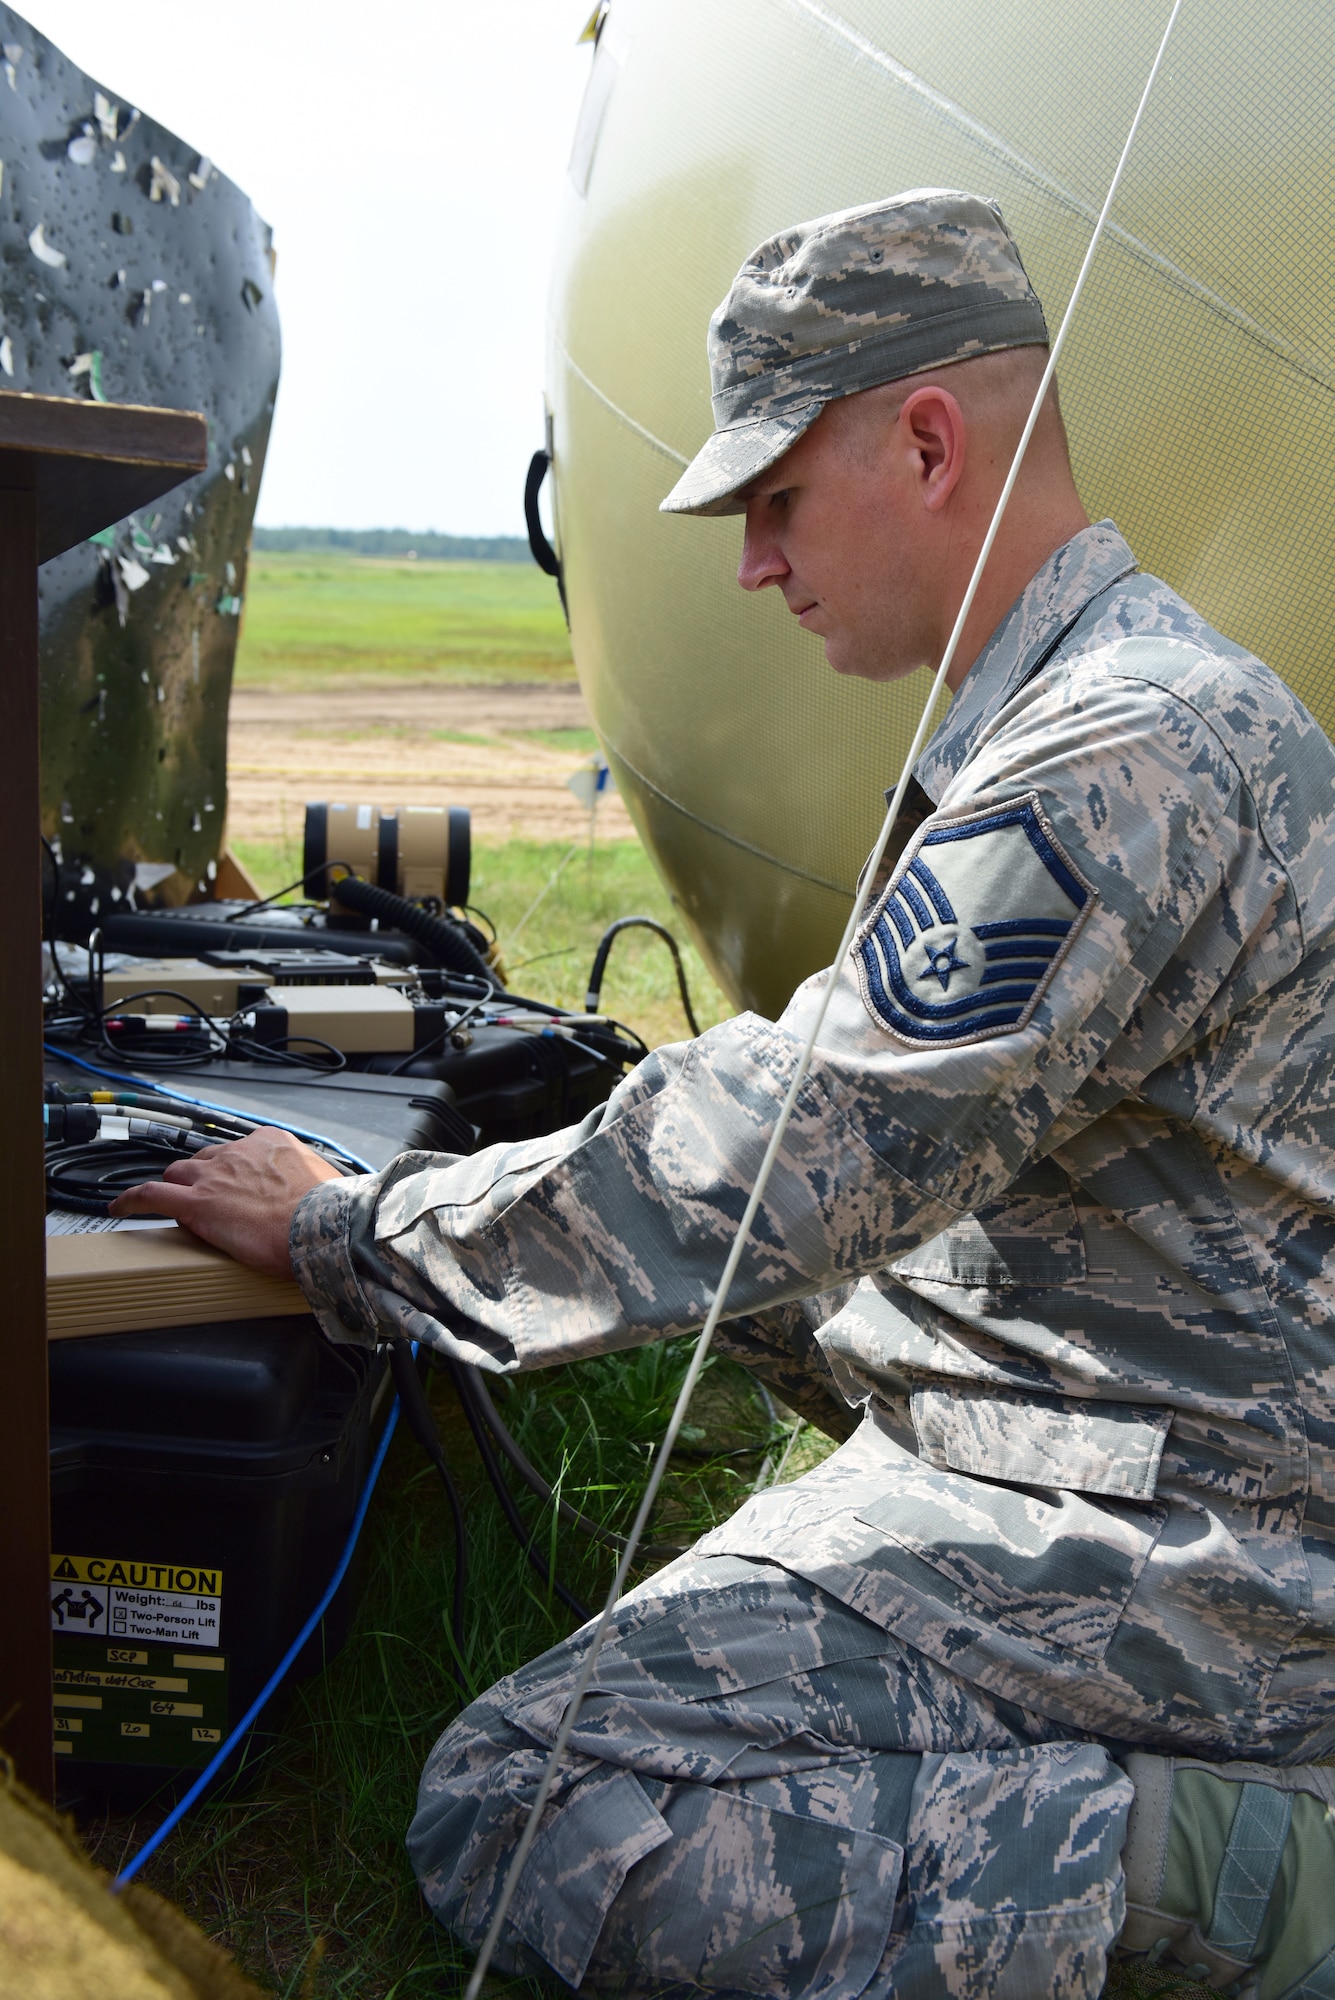 Master Sgt. Matt Throne, Radio Frequency transmissions, 271st Combat Communications Squadron, completes a preventive maintenance inspection on the satellite antenna set up on location at Brigadier General Kazio Veverskis Training Grounds, Kazlu Ruda, Lithuania, Aug. 14, 2018. Airmen of the 271st CBCS established a Small Communications Package to provide network and phone access to the teams completing deployment for training by constructing a military air-to-ground training range to be used by Lithuanian and other NATO forces. (U.S. Air National Guard photo by Tech. Sgt. Claire Behney/Released)